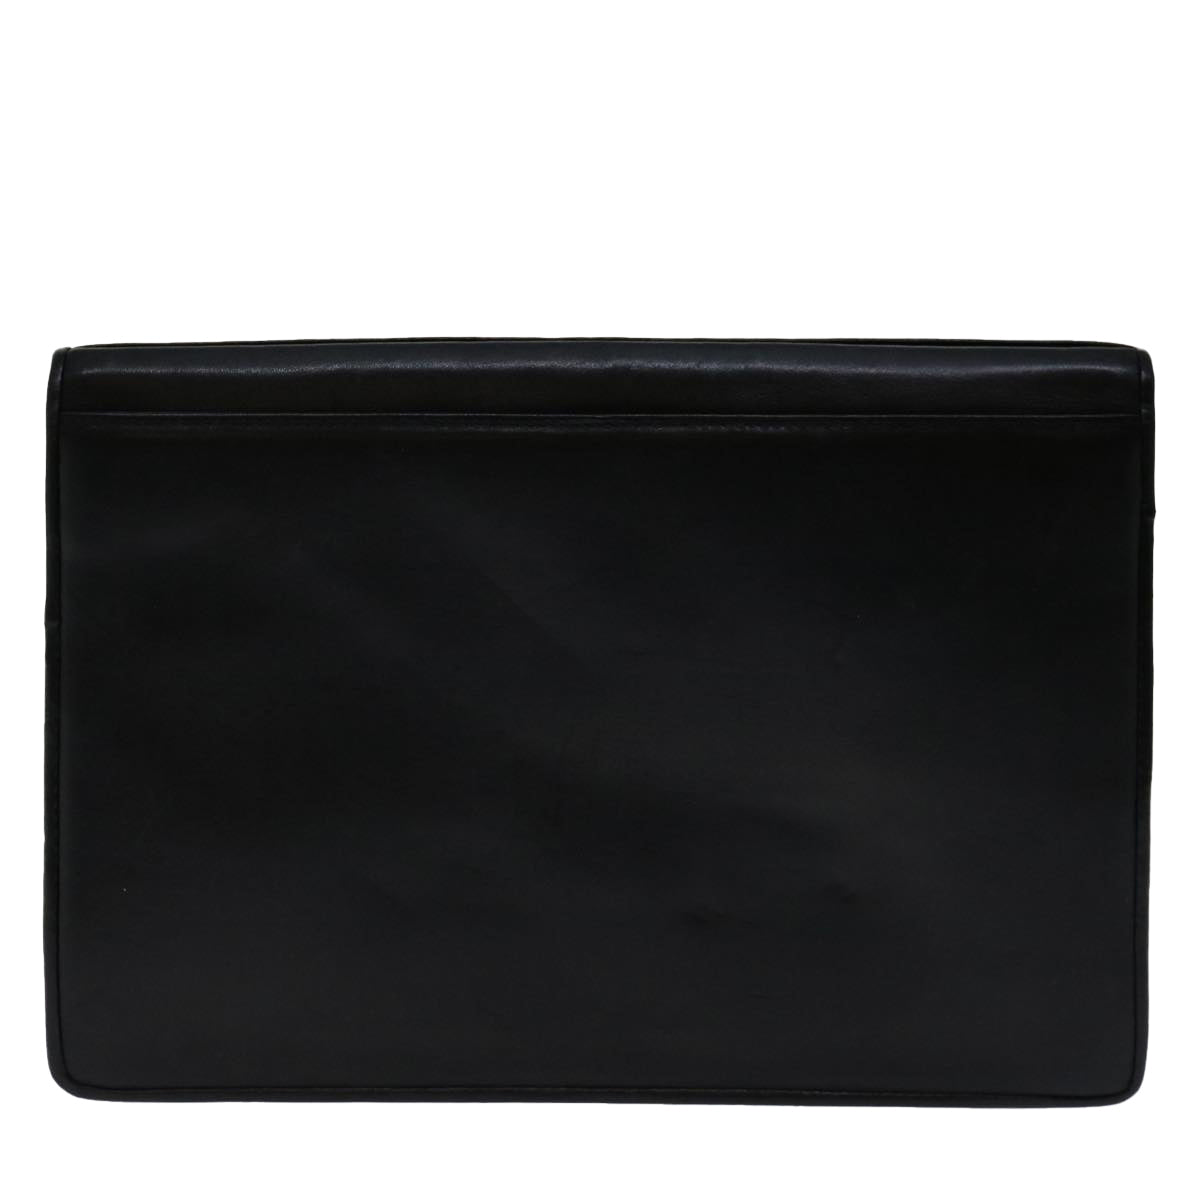 GIVENCHY Clutch Bag Leather Black Auth bs13297 - 0